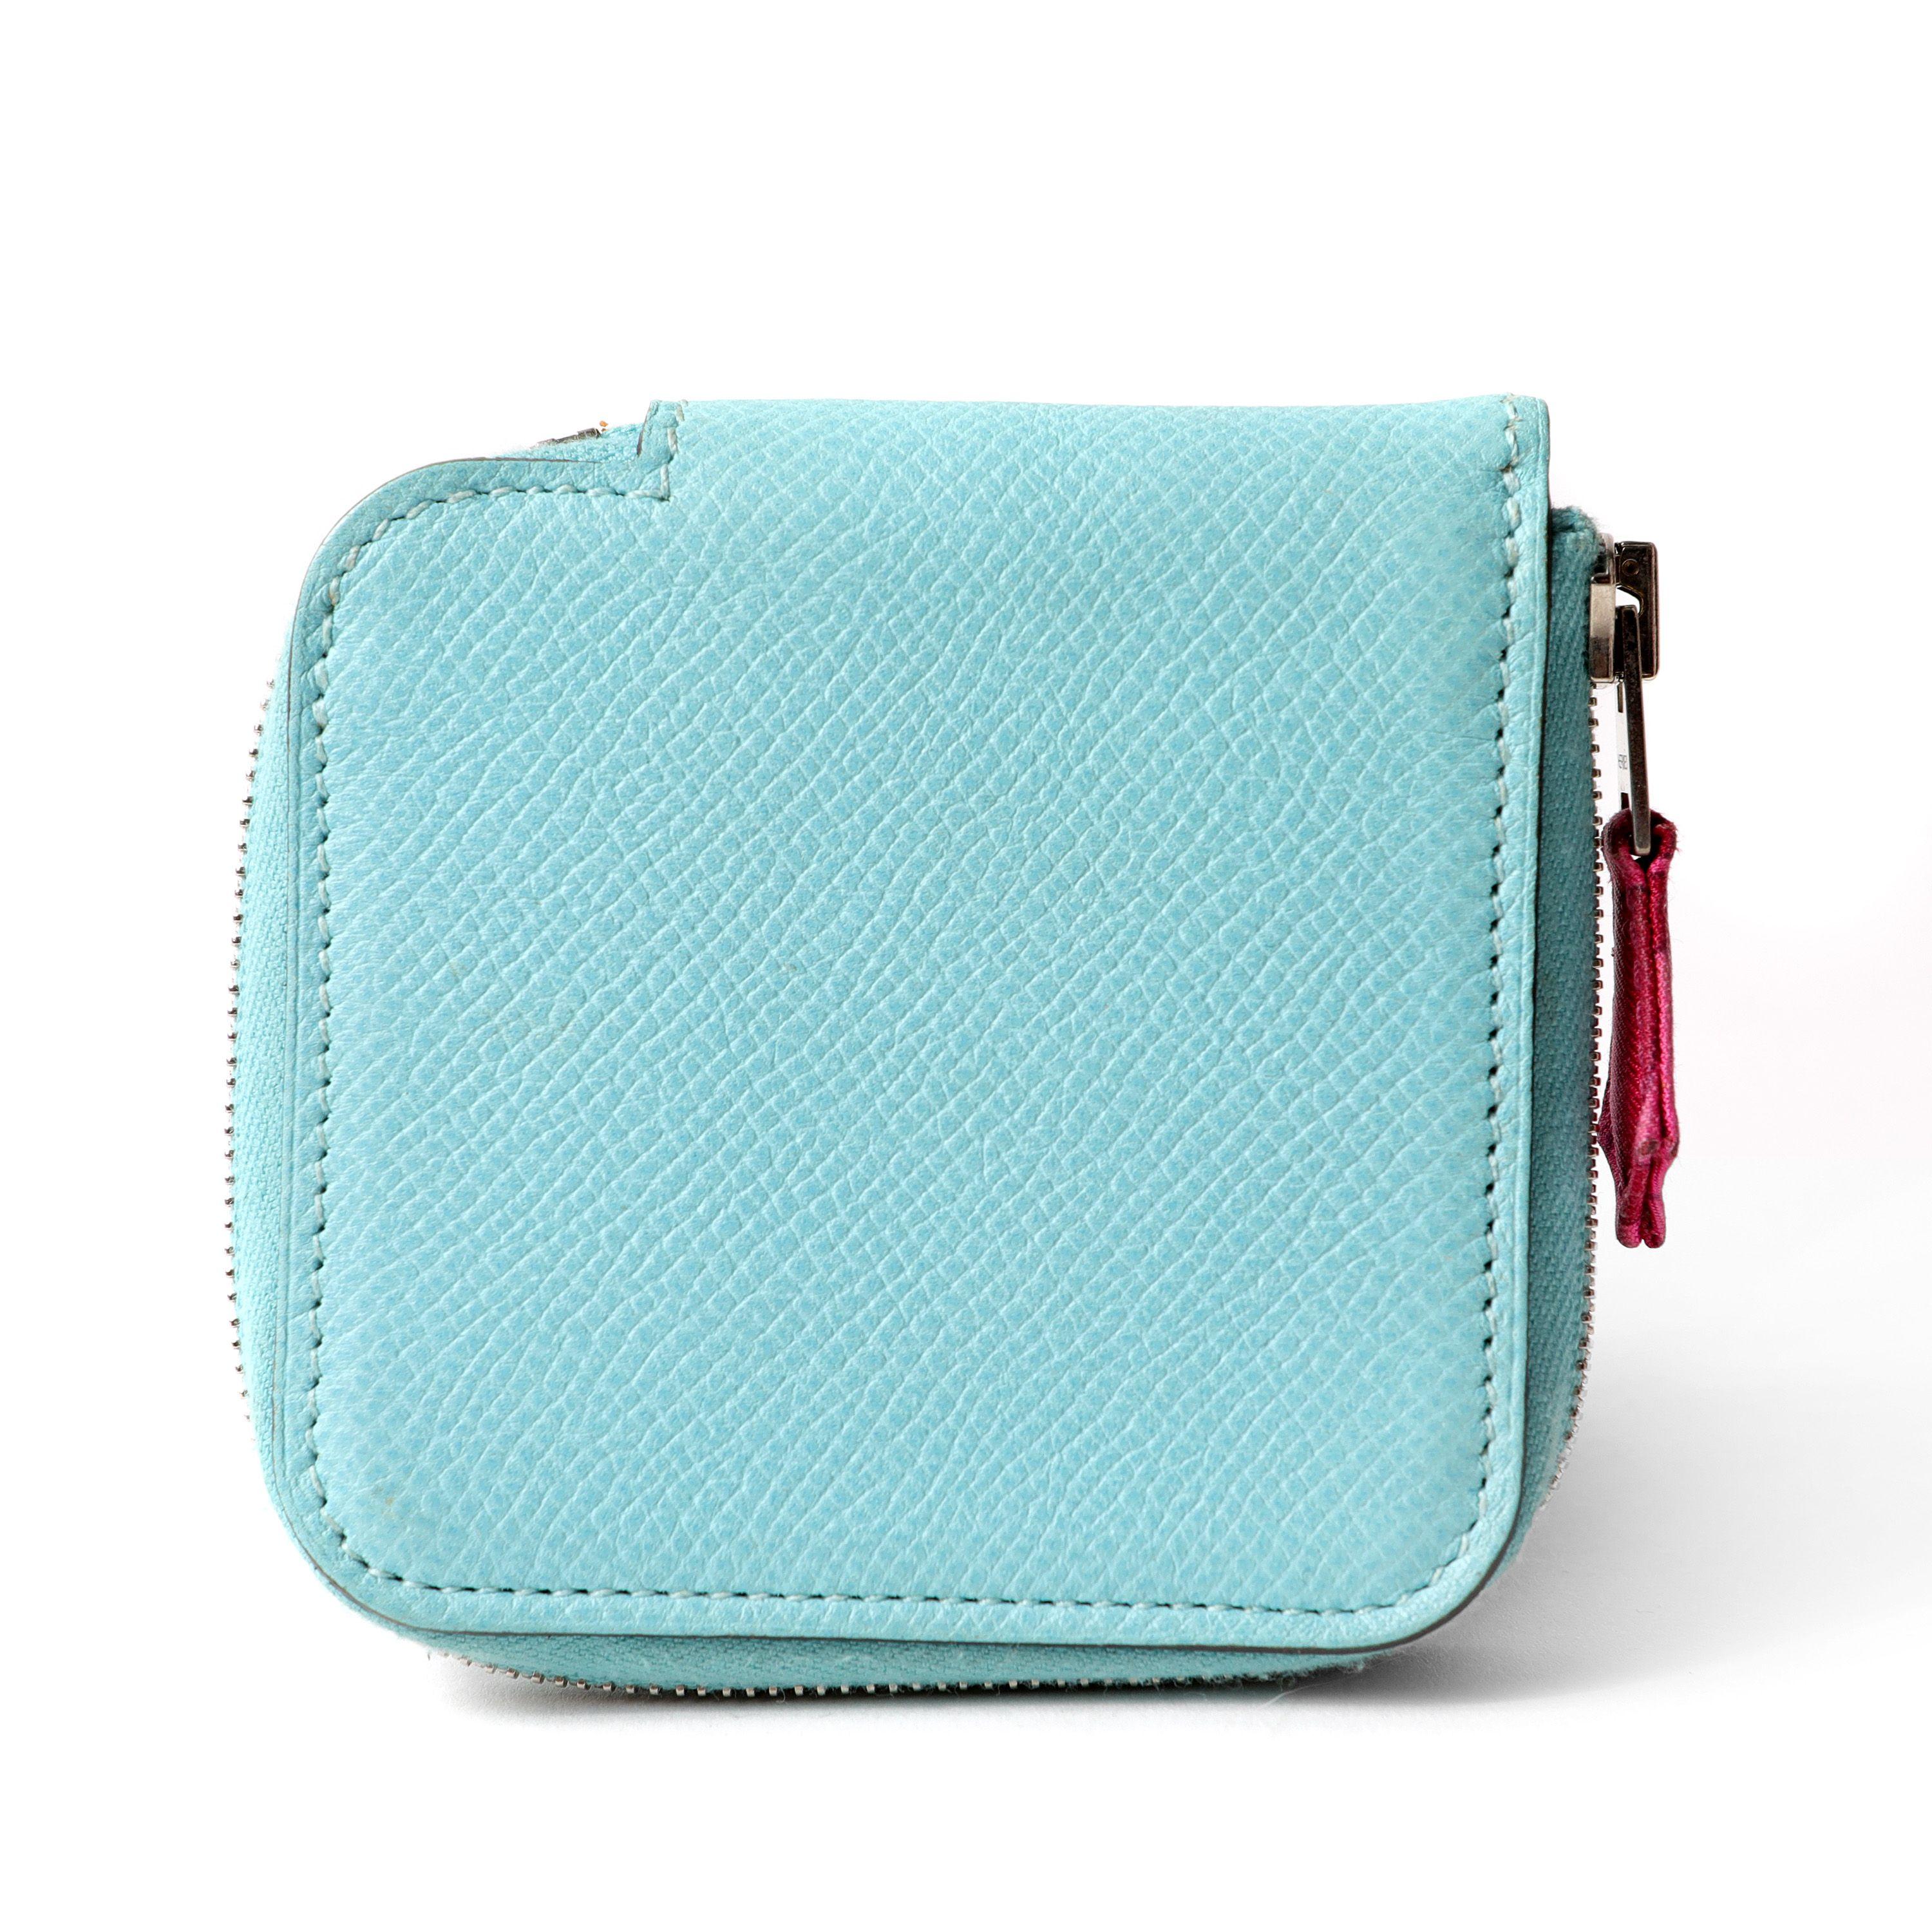 Hermès Robins Egg Blue Epsom Small Change Purse In Good Condition For Sale In Palm Beach, FL